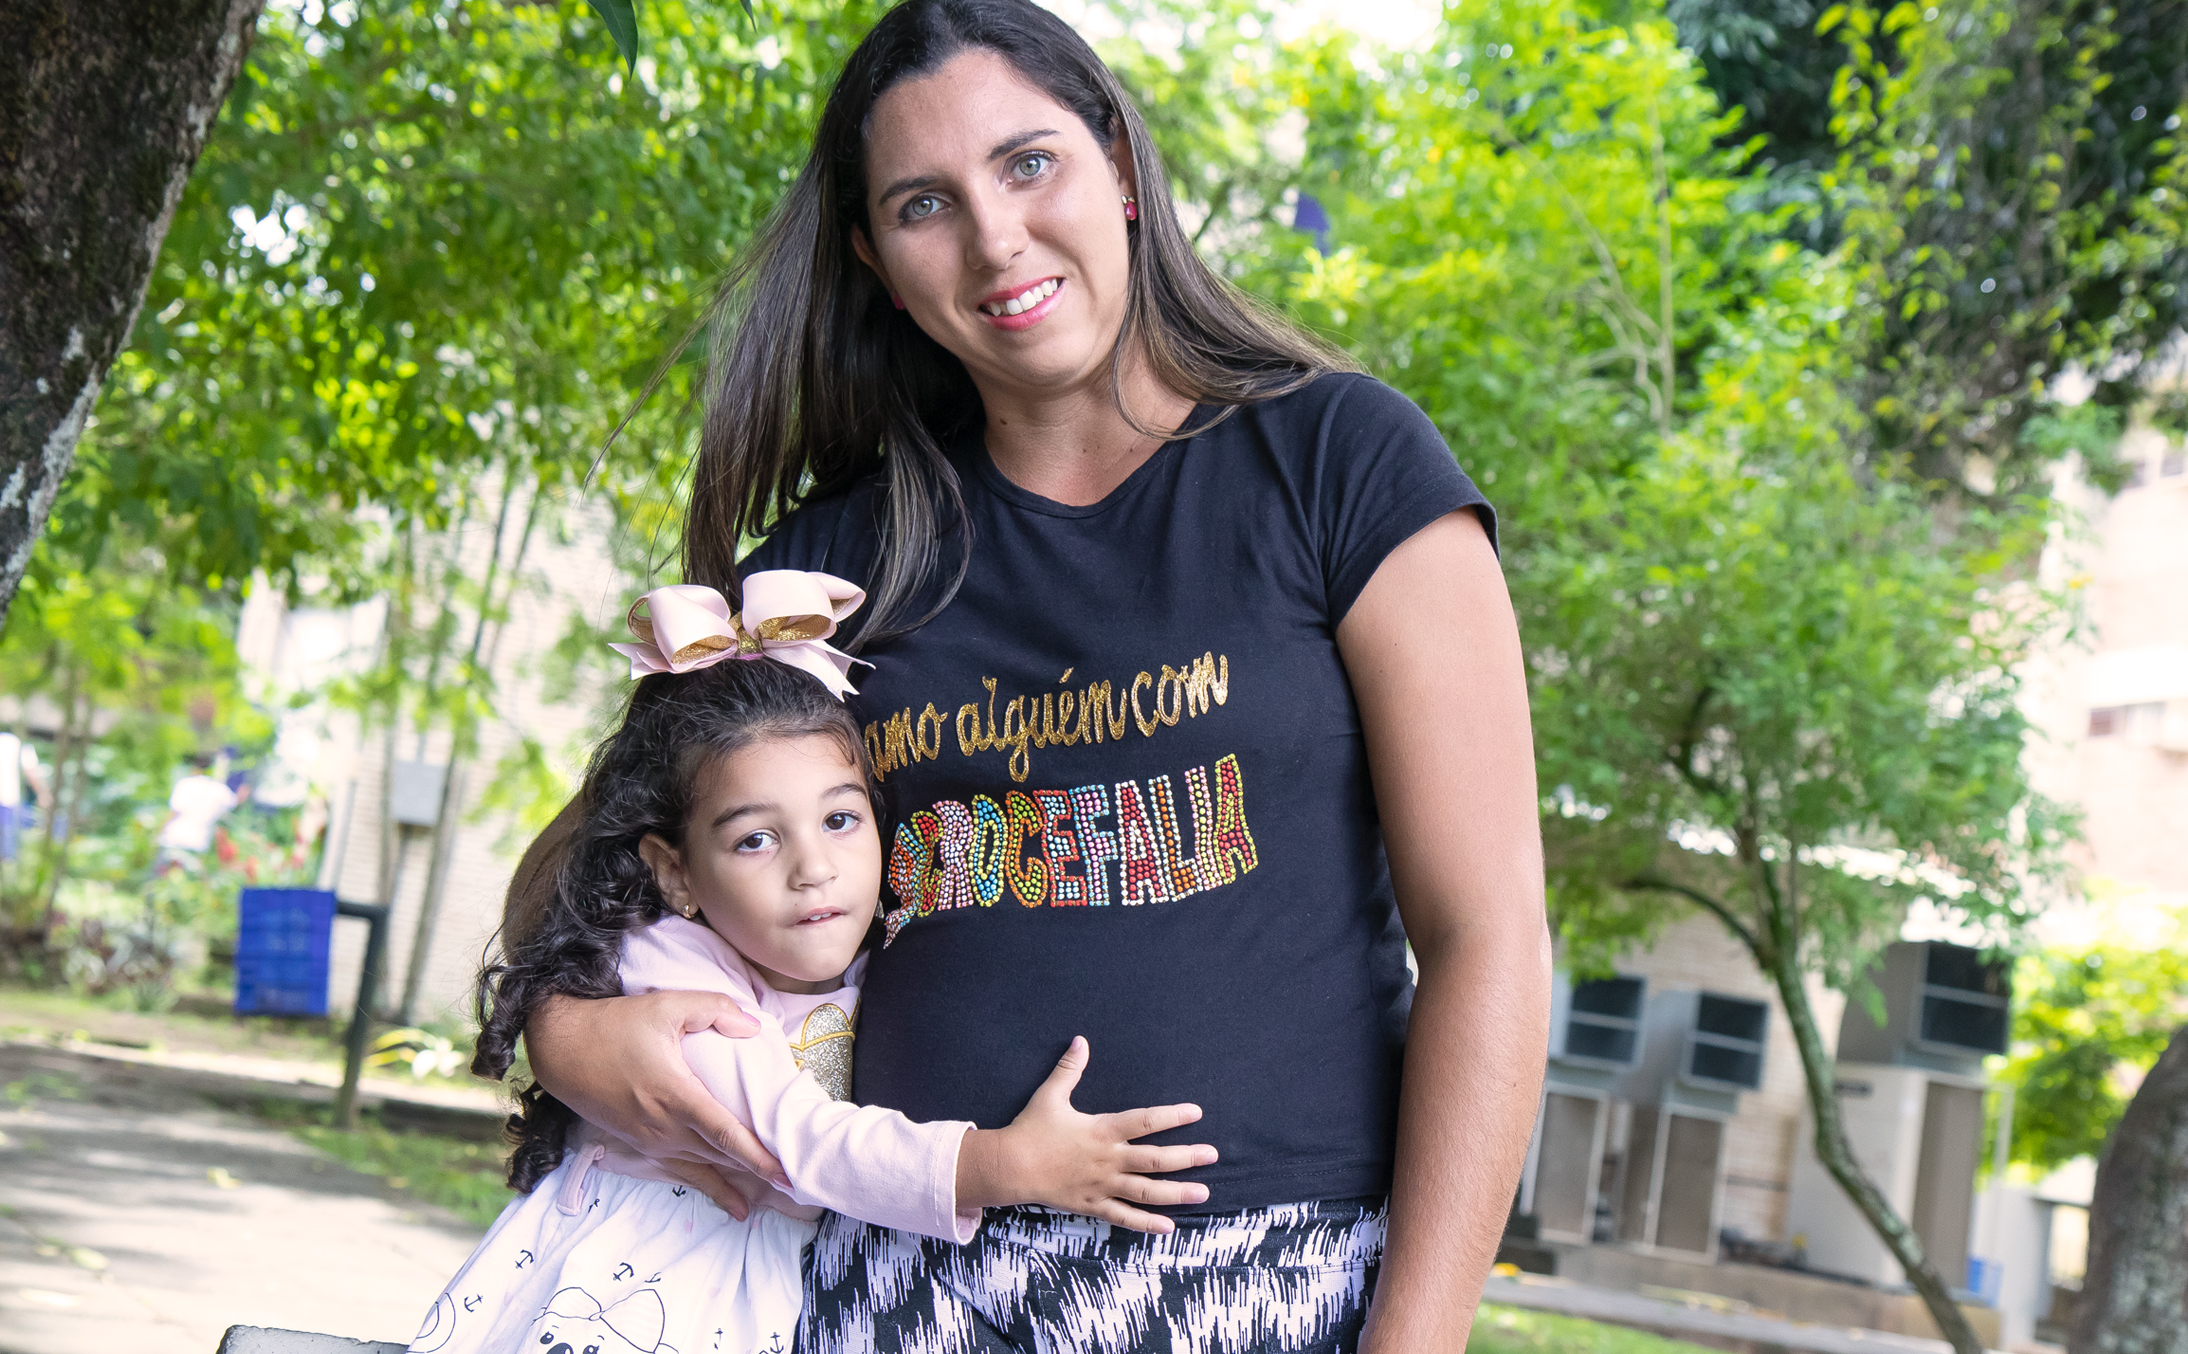 Germany Gracy Maia, pictured with her daughter Giovanna, shared her experience caring for a child affected by congenital Zika virus syndrome..